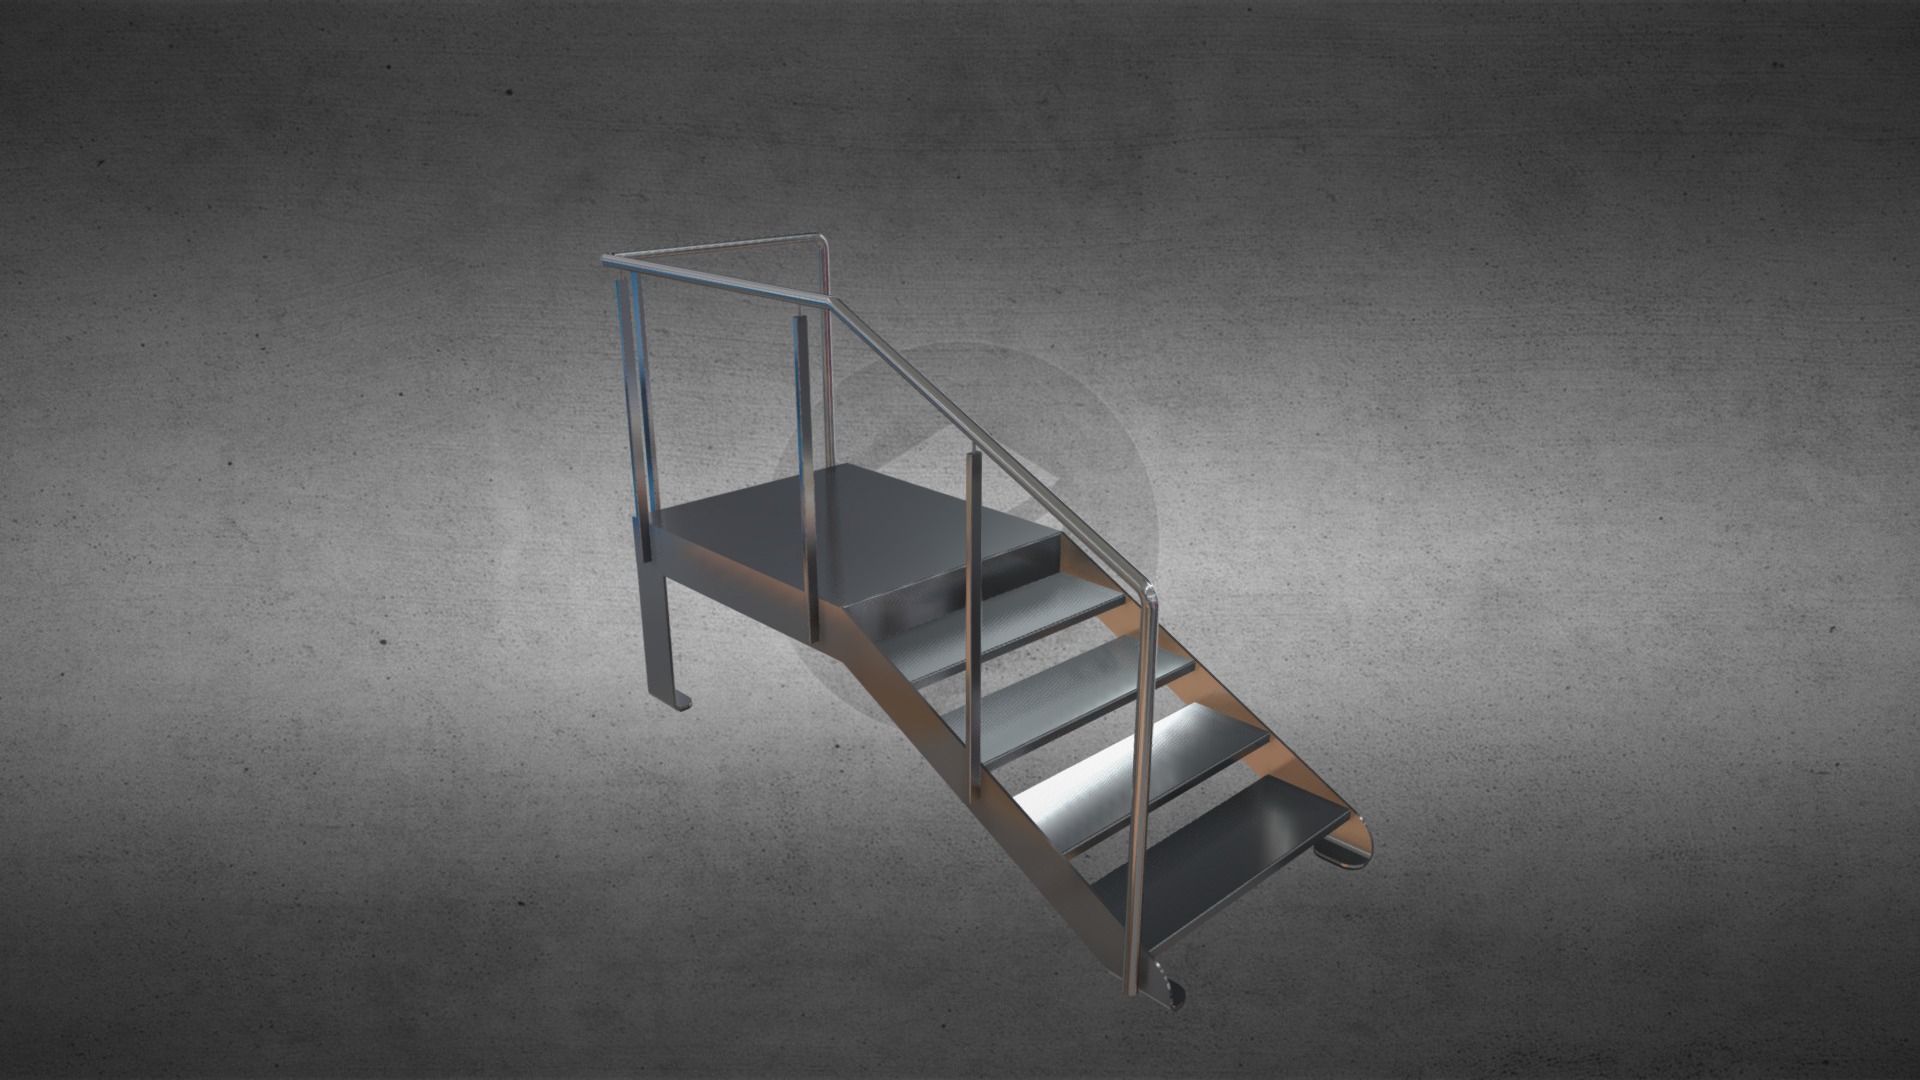 3D model Лестница нержавеющая / Stainless-steel Stair - This is a 3D model of the Лестница нержавеющая / Stainless-steel Stair. The 3D model is about a chair on a grey surface.